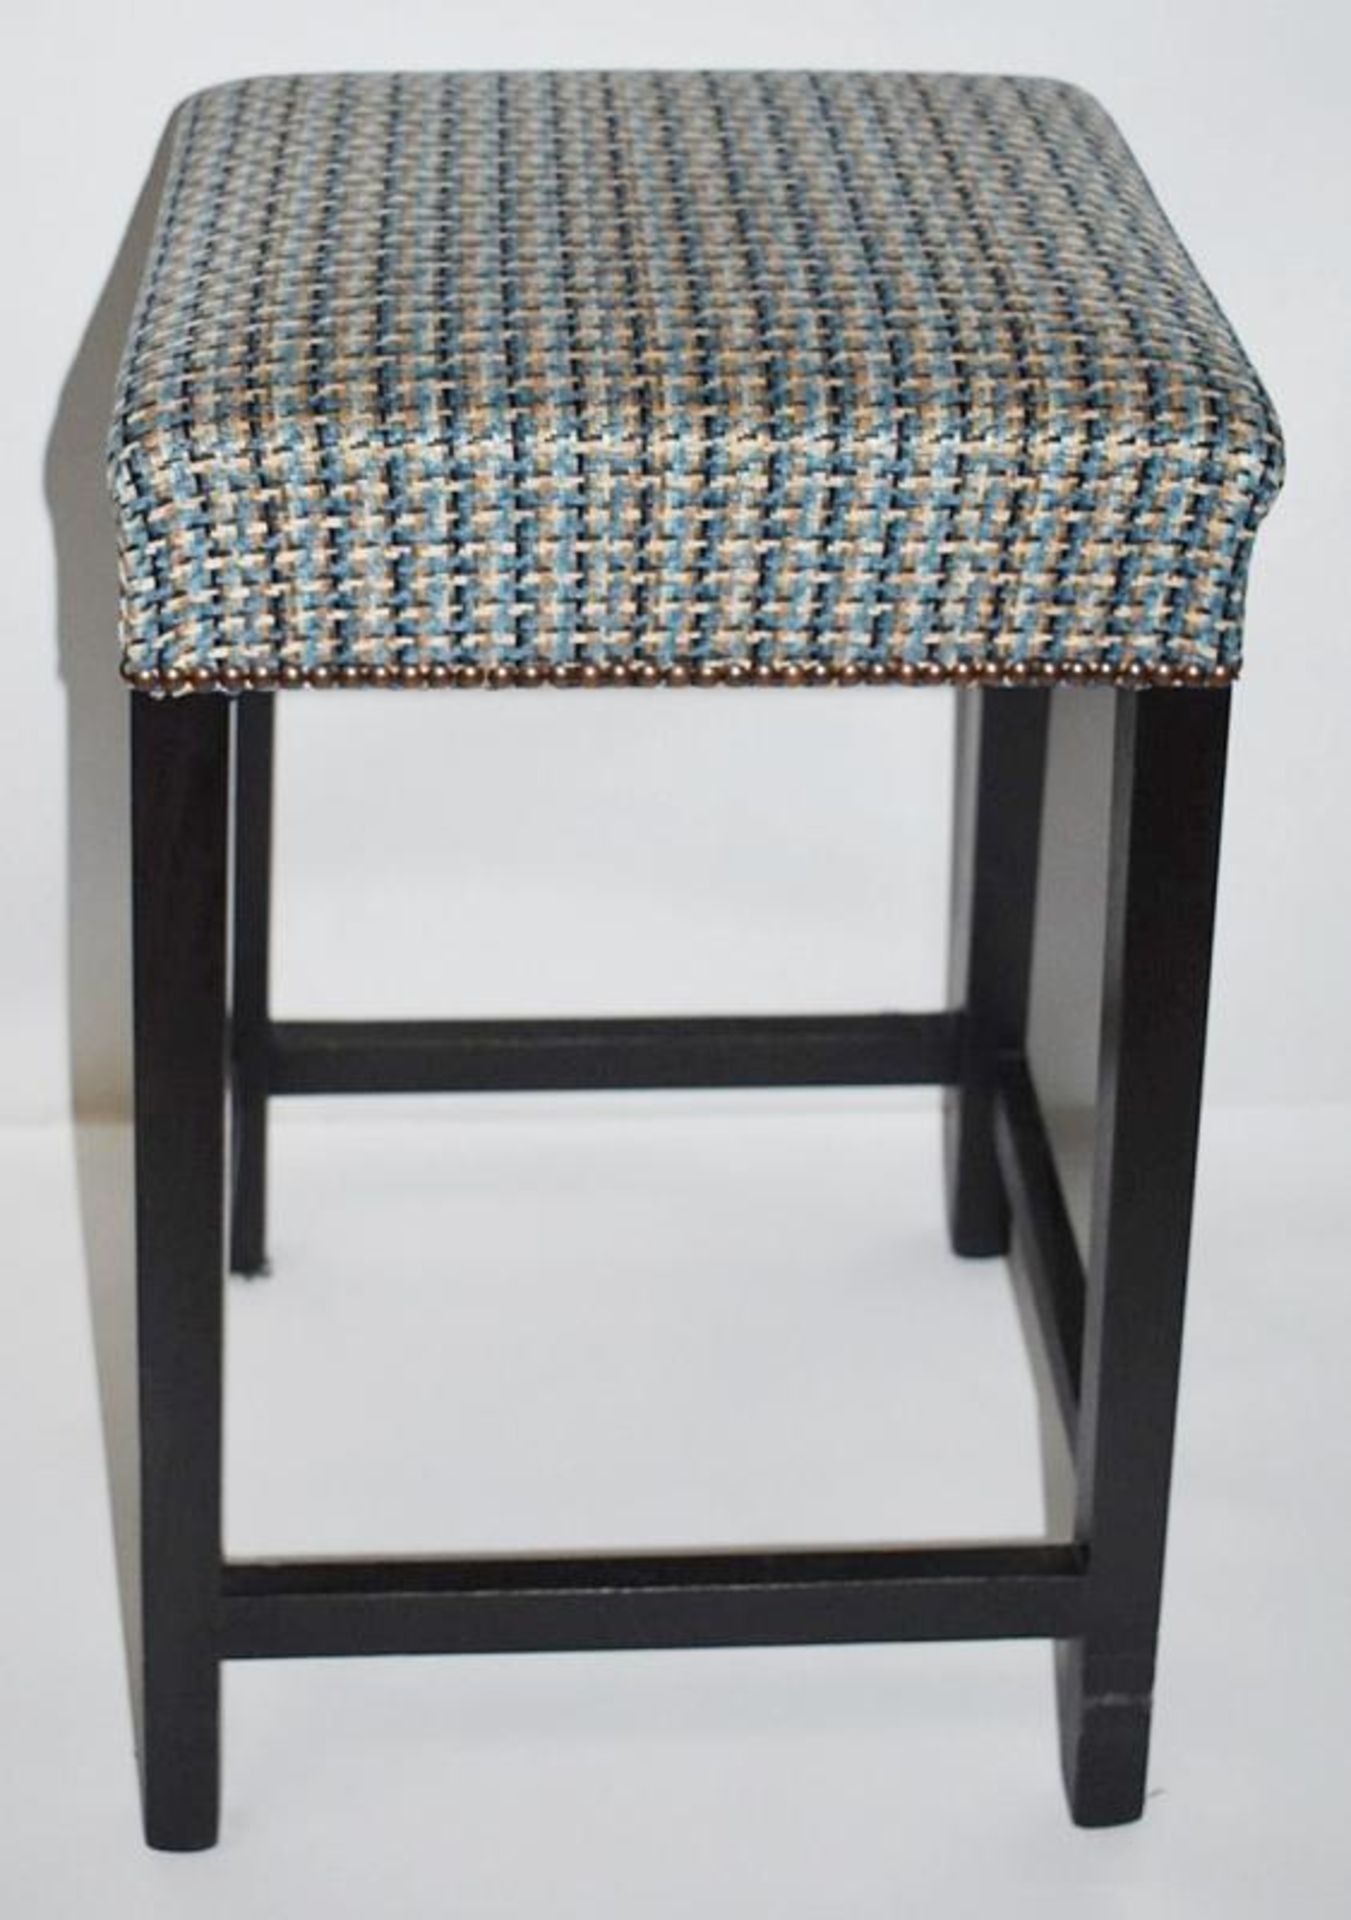 1 x Contemporary Bar Stool Upholstered In A Chic Designer Fabric - Recently Removed From A Famous De - Image 2 of 7